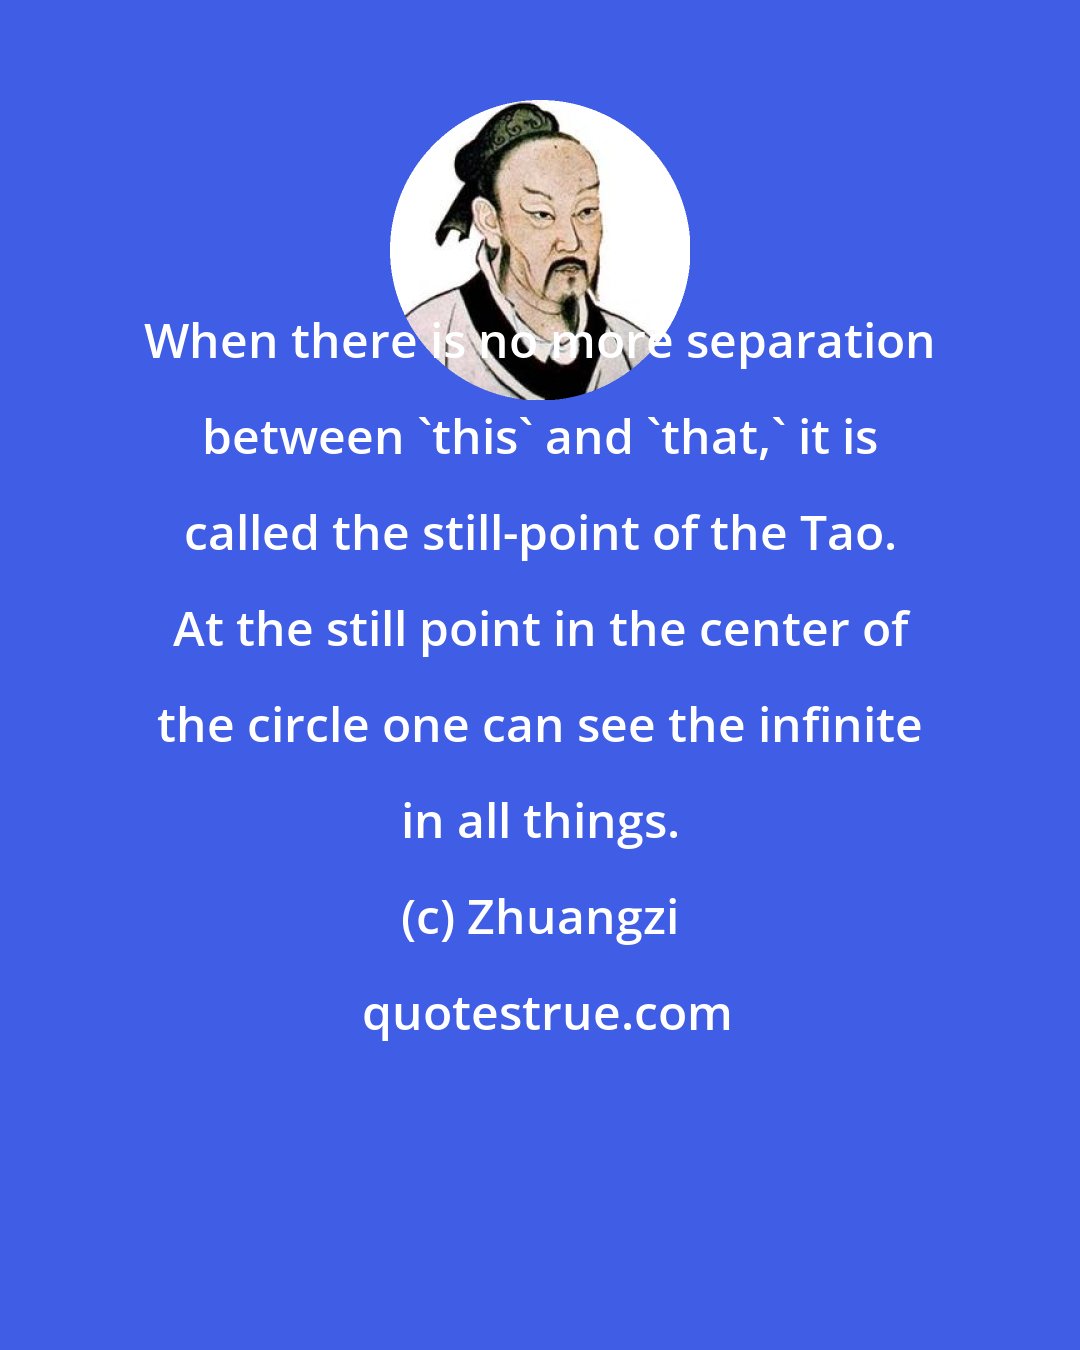 Zhuangzi: When there is no more separation between 'this' and 'that,' it is called the still-point of the Tao. At the still point in the center of the circle one can see the infinite in all things.